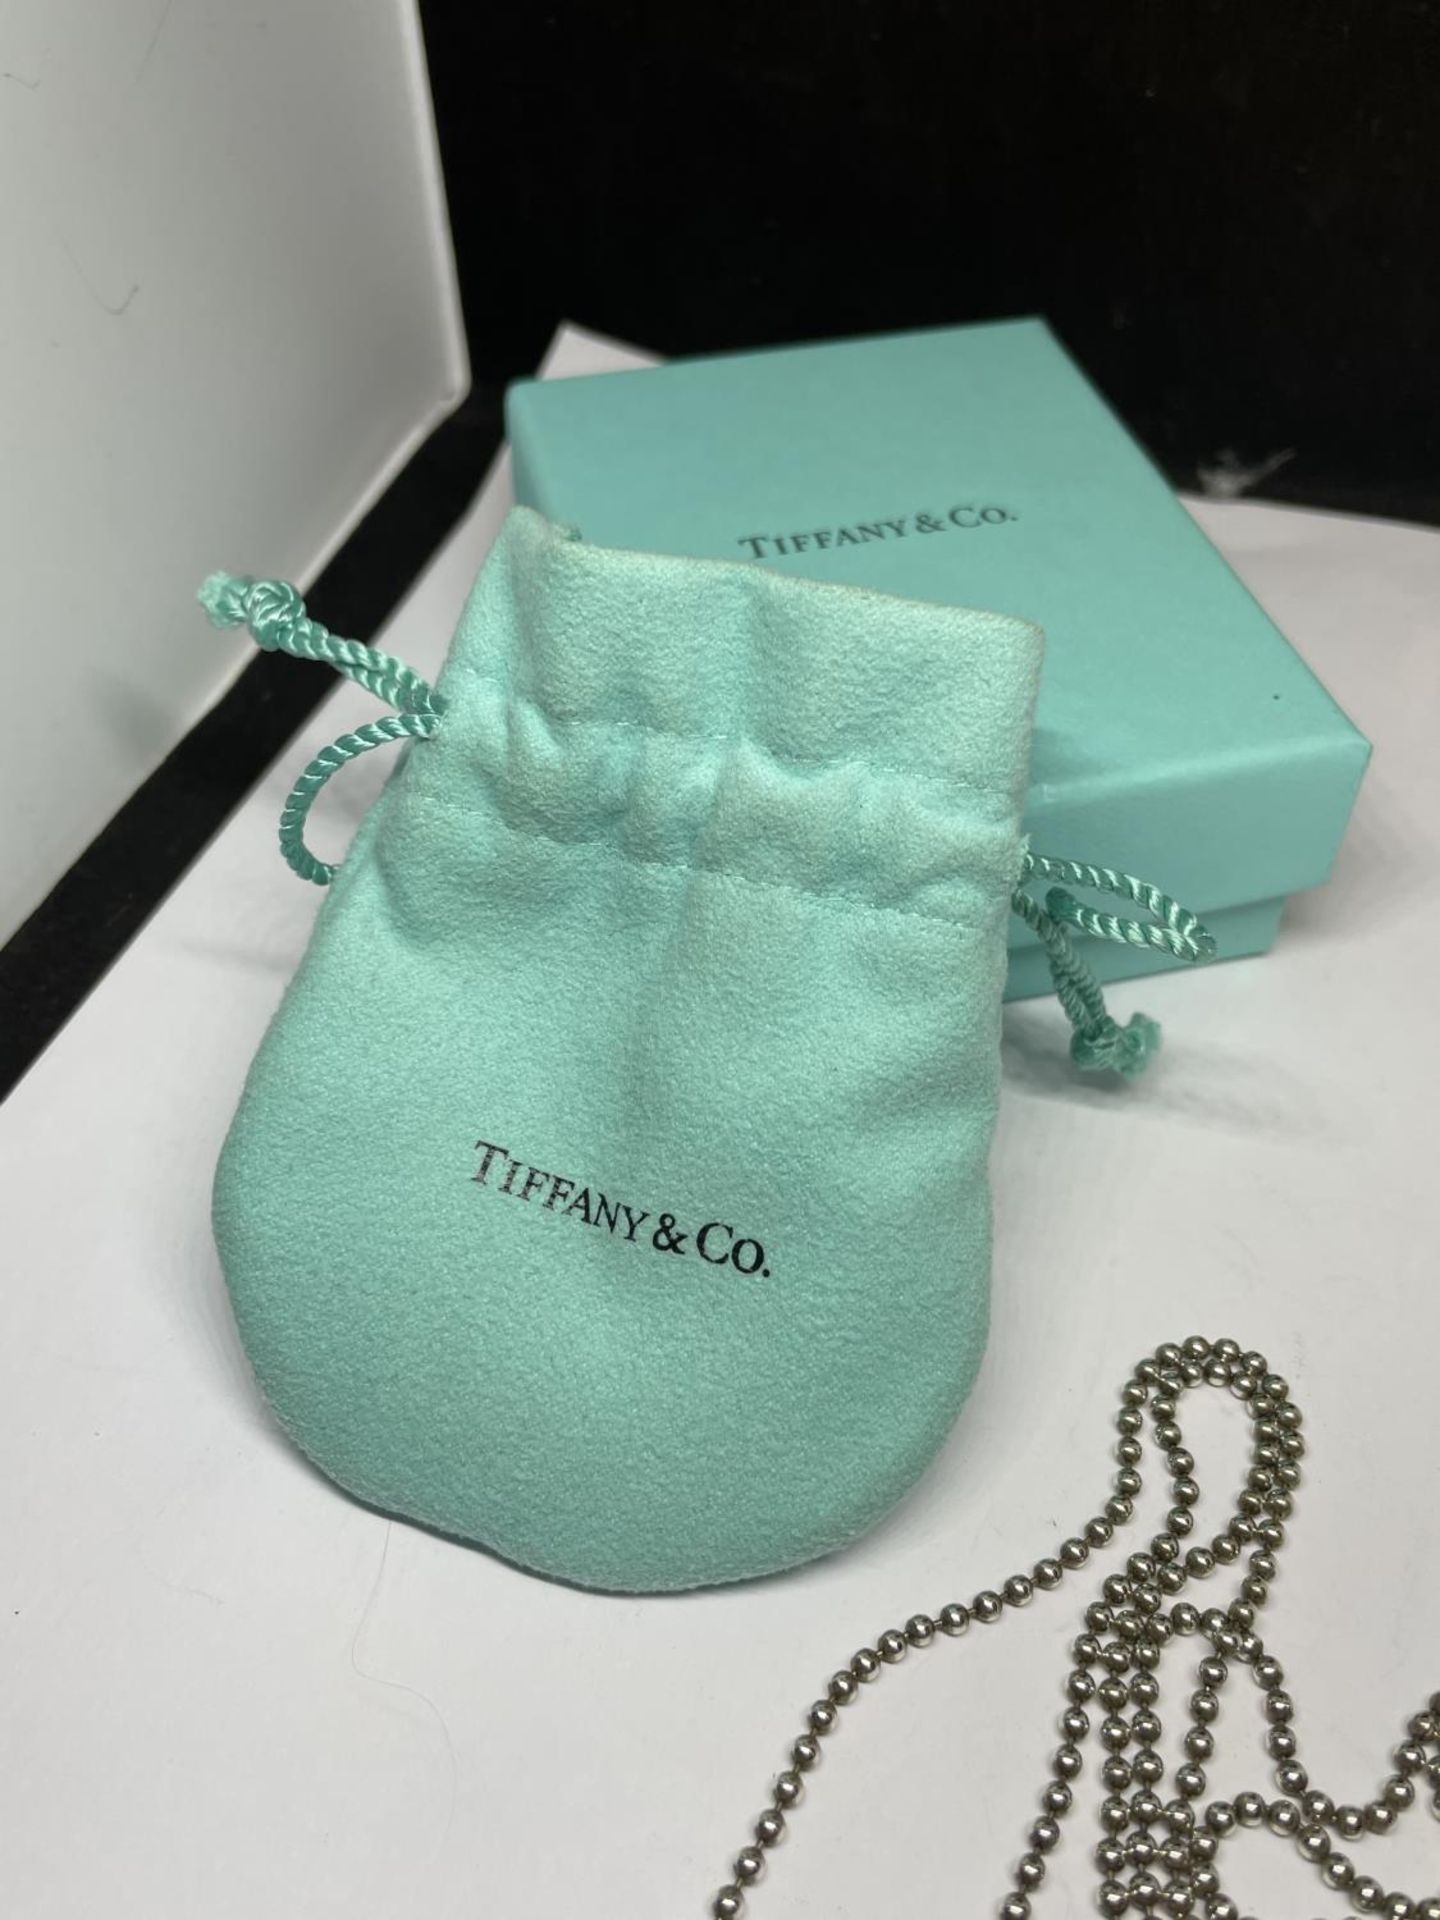 A TIFFANY NECKLACE AND LARGE HEART PENDANT CHAIN LENGTH 76CM HEART 3CM X 2.5CM WITH ORIGINAL POUCH - Image 6 of 8